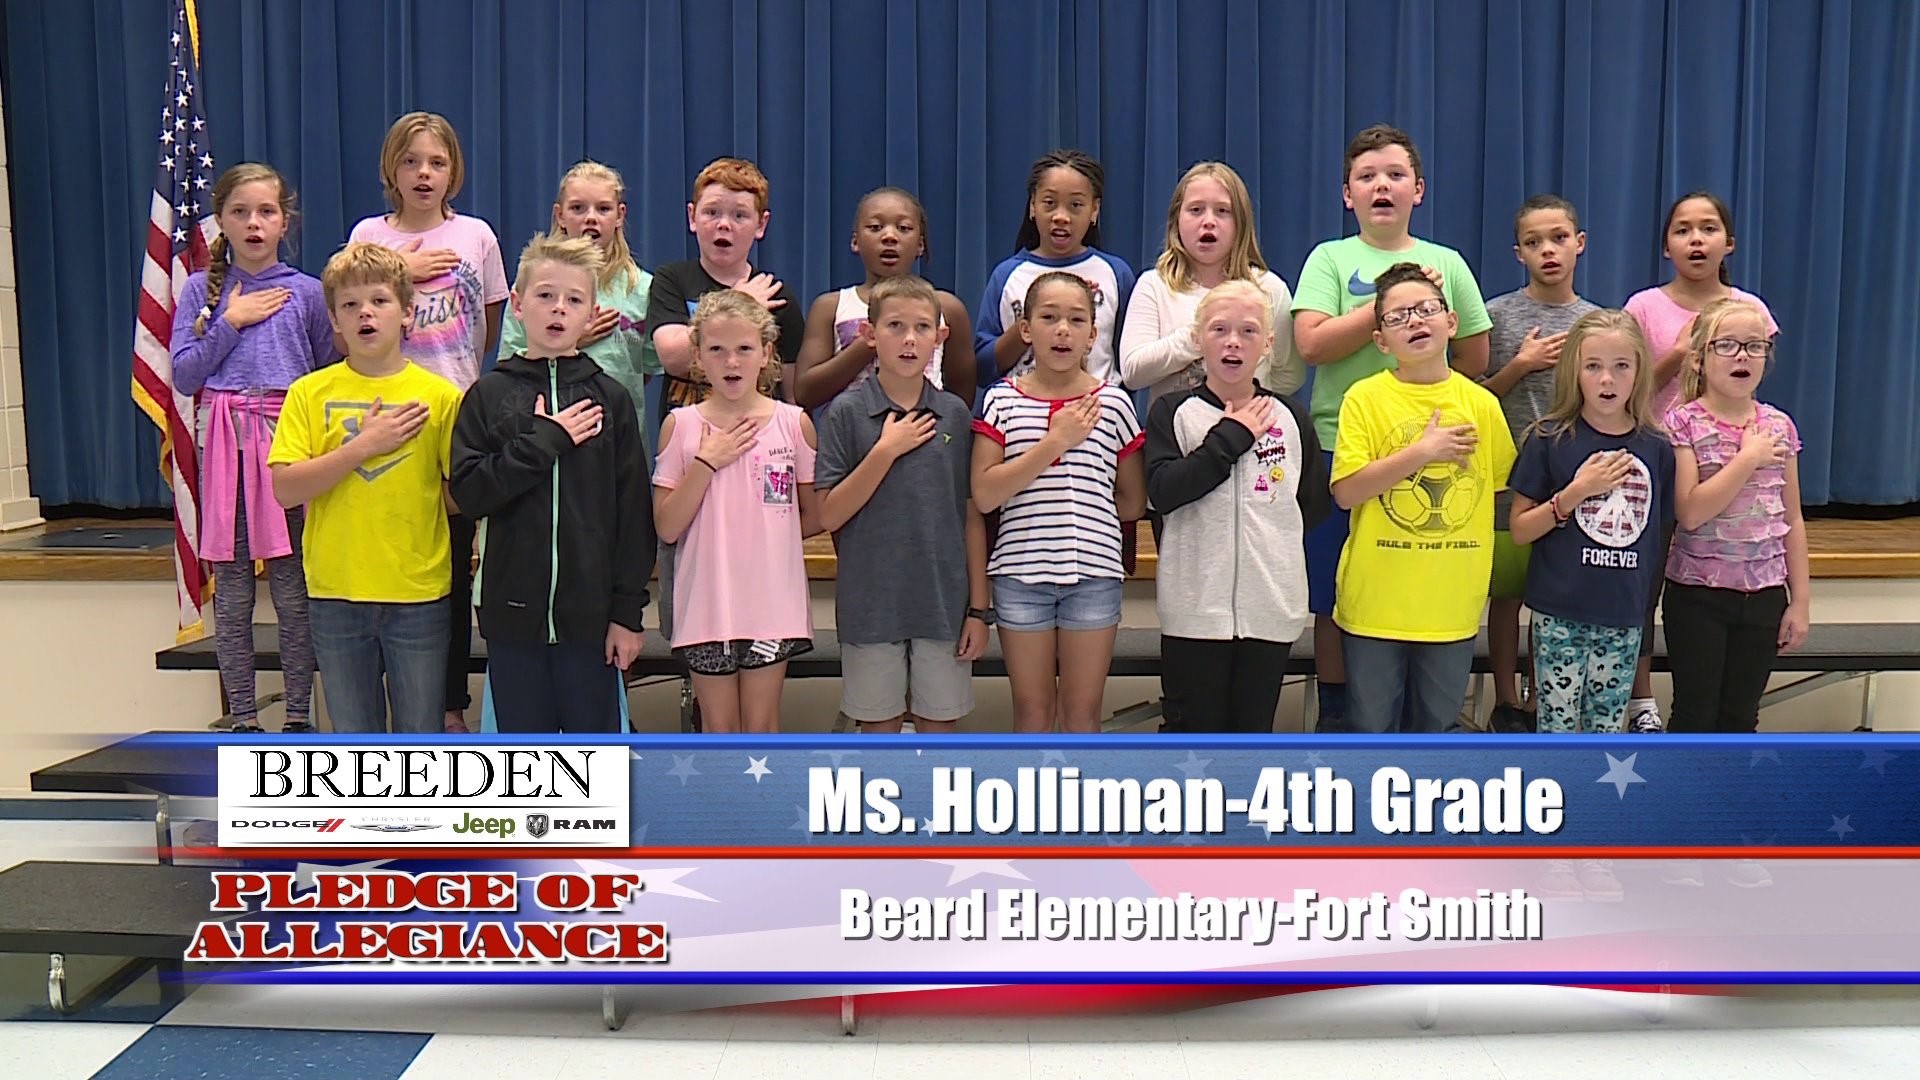 Ms. Holliman  4th Grade  Beard Elementary  Fort Smith